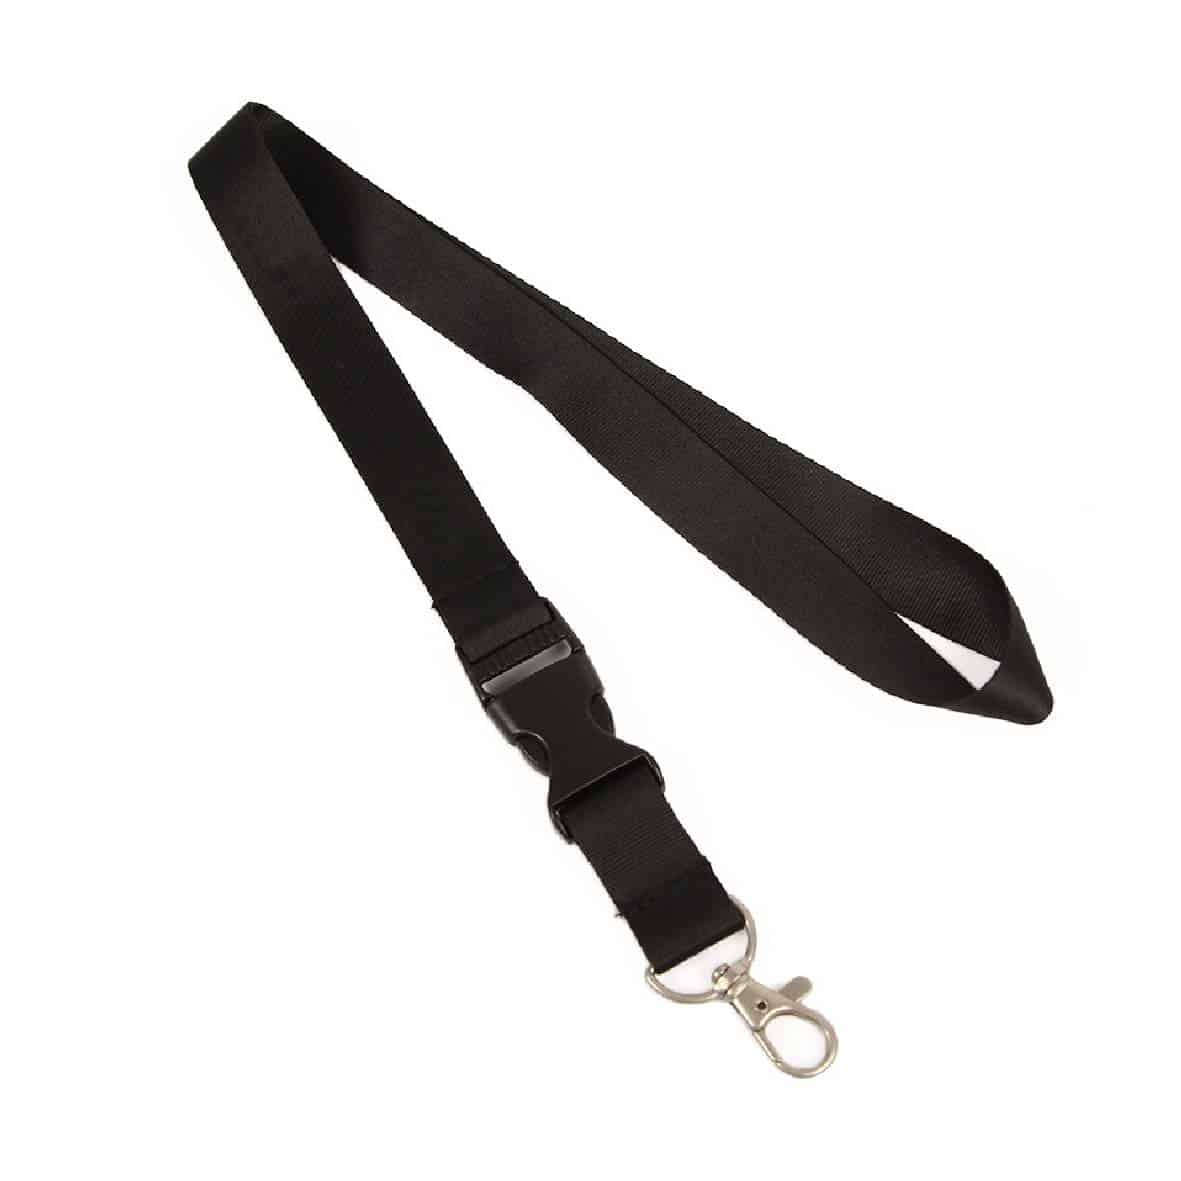 Nylon Lanyards Malaysia by SJ-World Gifts Malaysia Trusted Corporate Gift Supplier